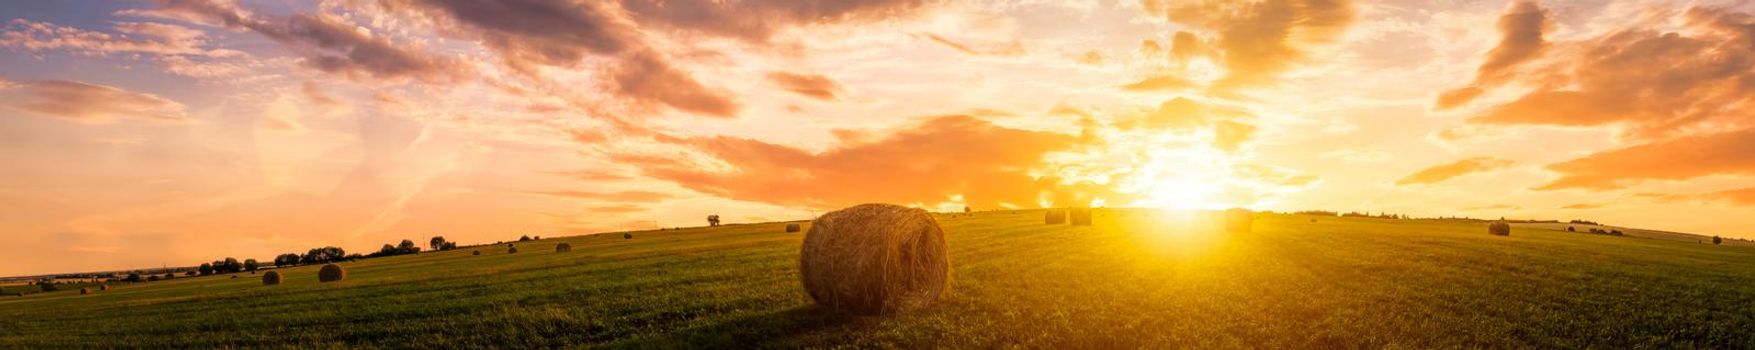 Sunset or sunrise in a field with haystacks on a summer or early autumn evening with a cloudy sky in the background. Procurement of animal feed in agriculture. Landscape.